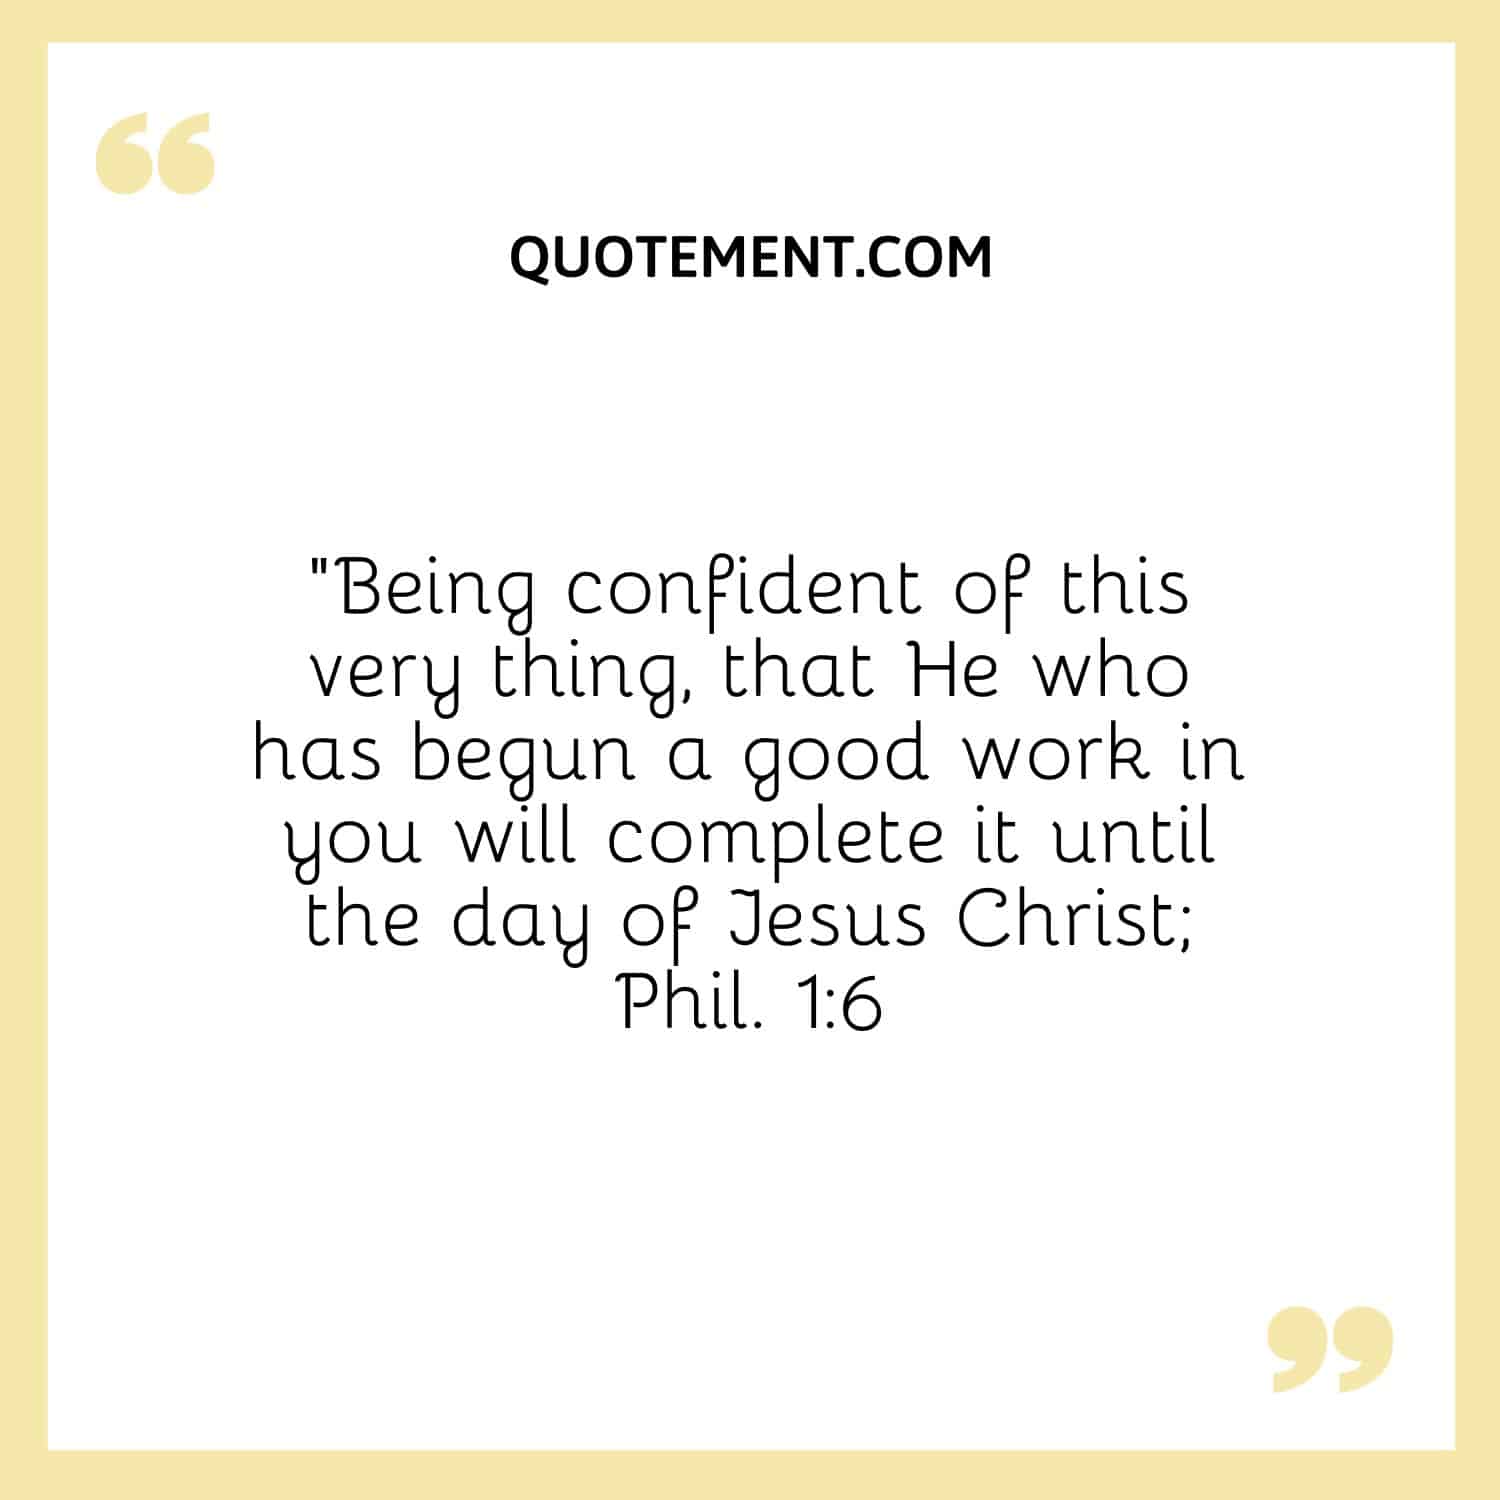 “Being confident of this very thing, that He who has begun a good work in you will complete it until the day of Jesus Christ; Phil. 16